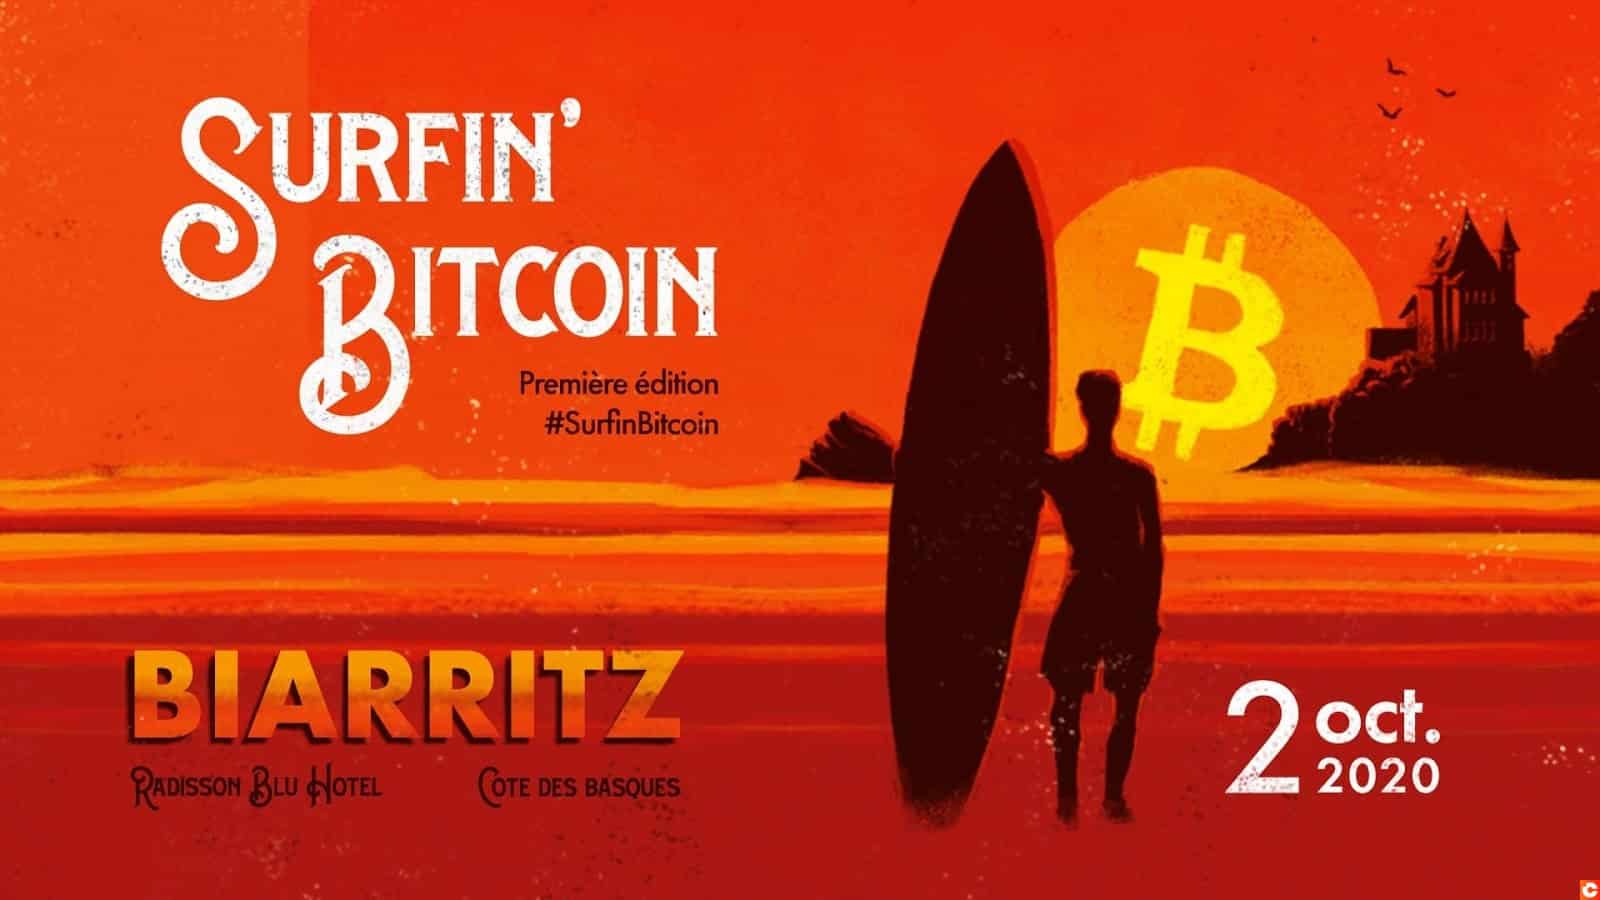 Surfin' Bitcoin, the First Event Fully Dedicated to Bitcoin (BTC) in France, Set between the Sun and the Storm